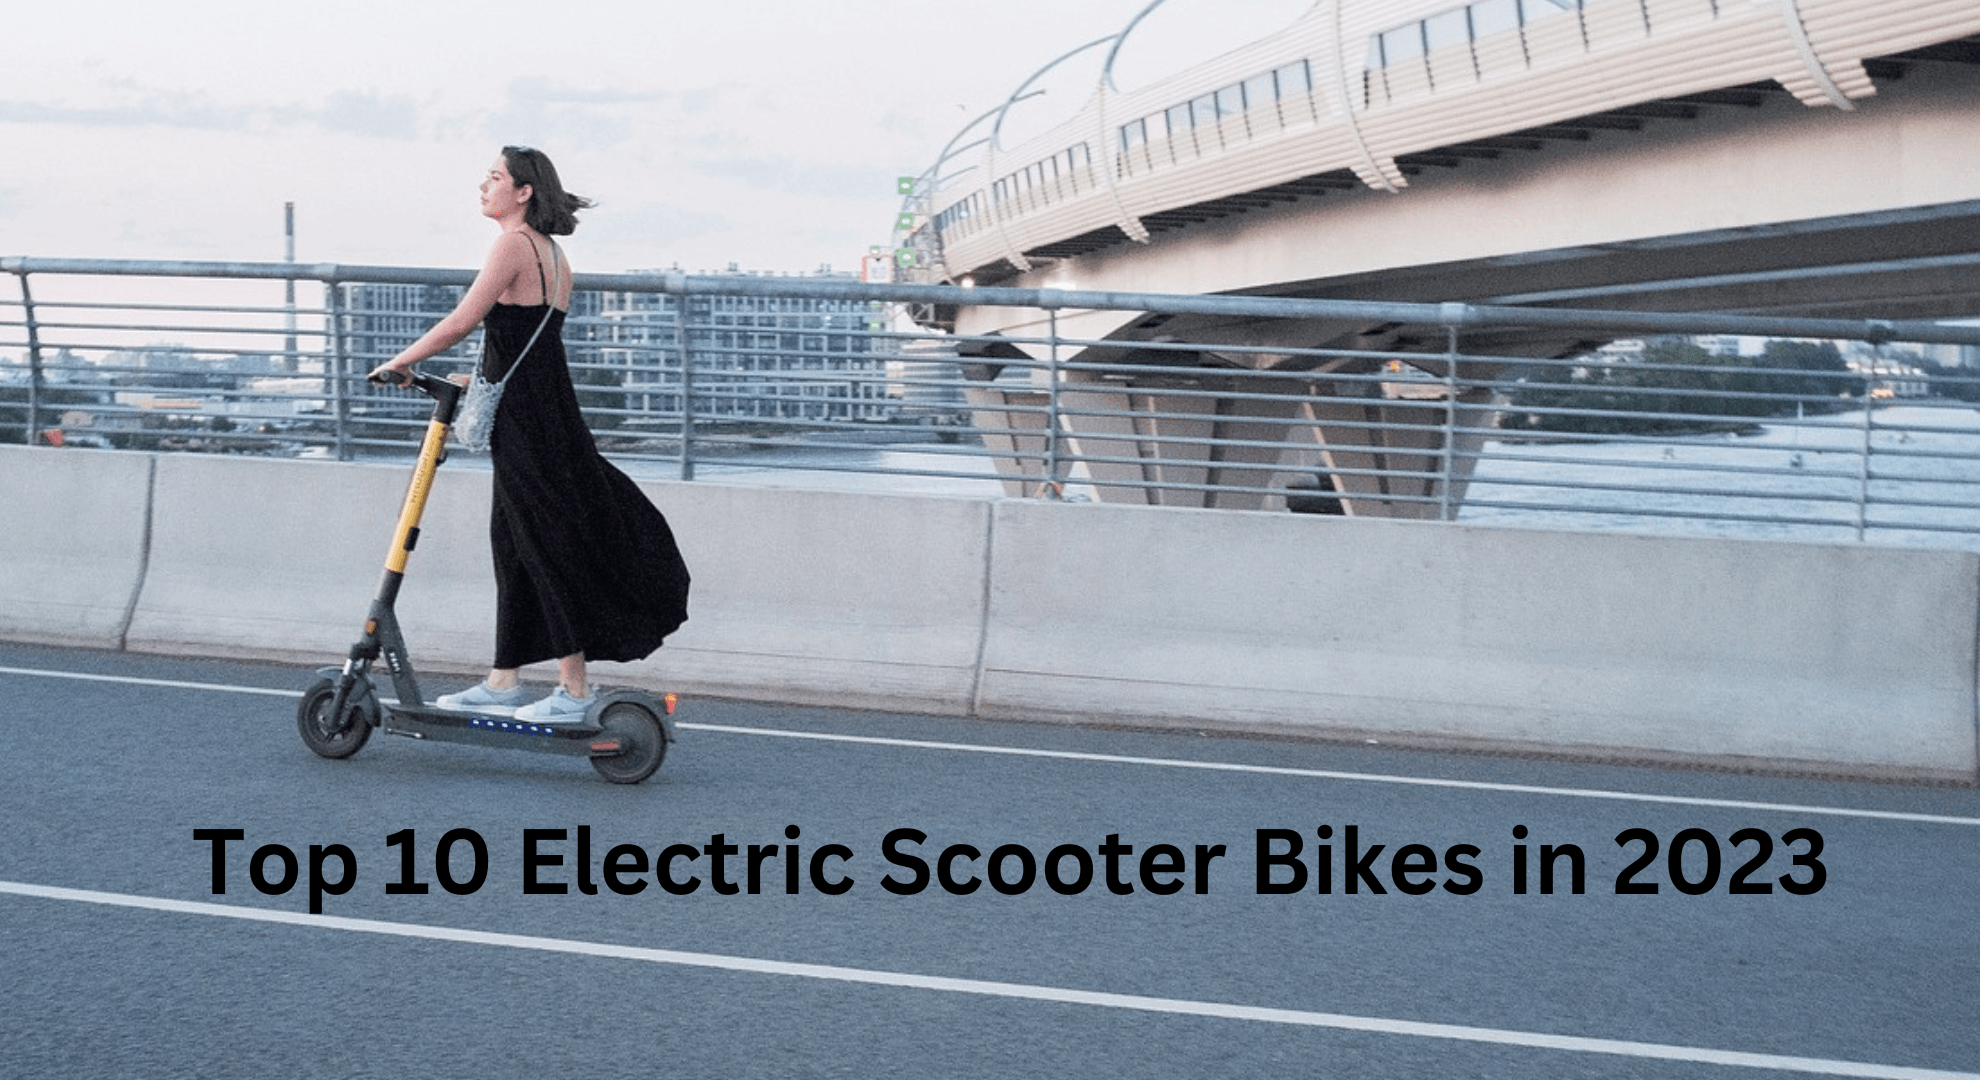 Top 10 Electric Scooter Bikes in 2023